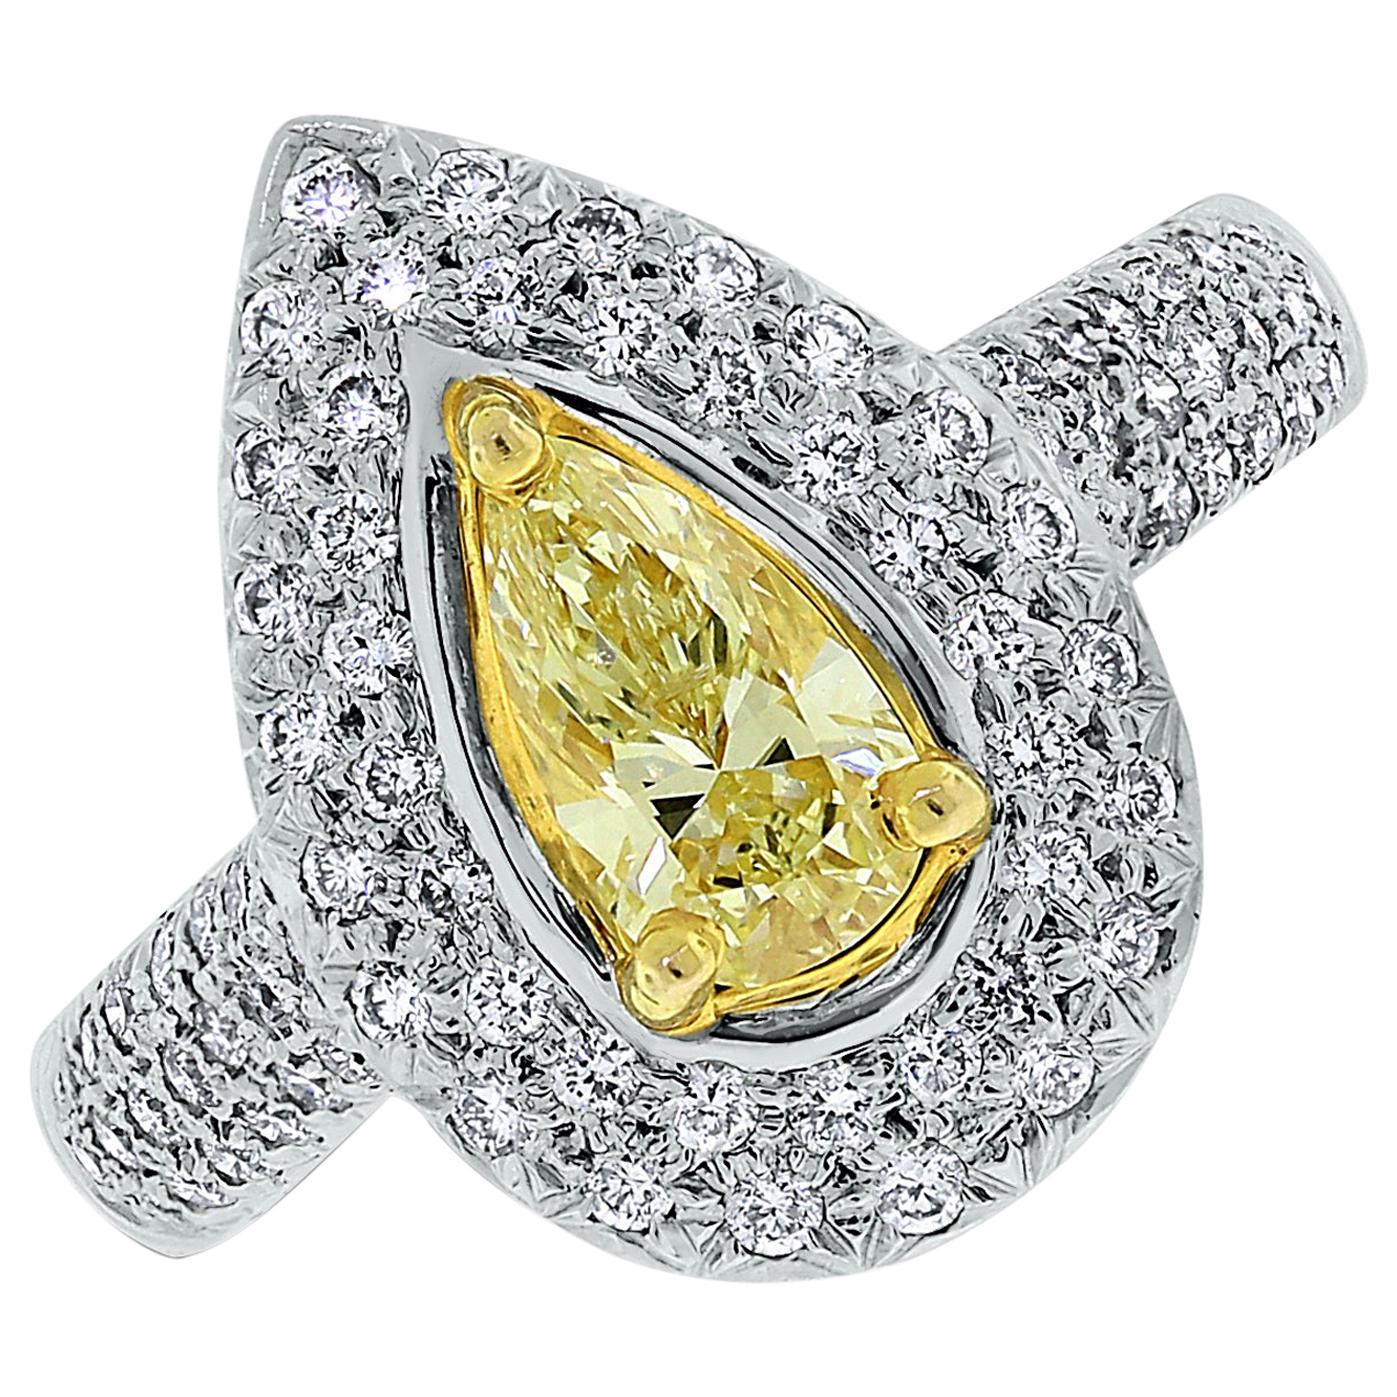 Beauvince Luz Ring 0.56 Carat Pear Shape Fancy Yellow SI2 Diamond in White Gold